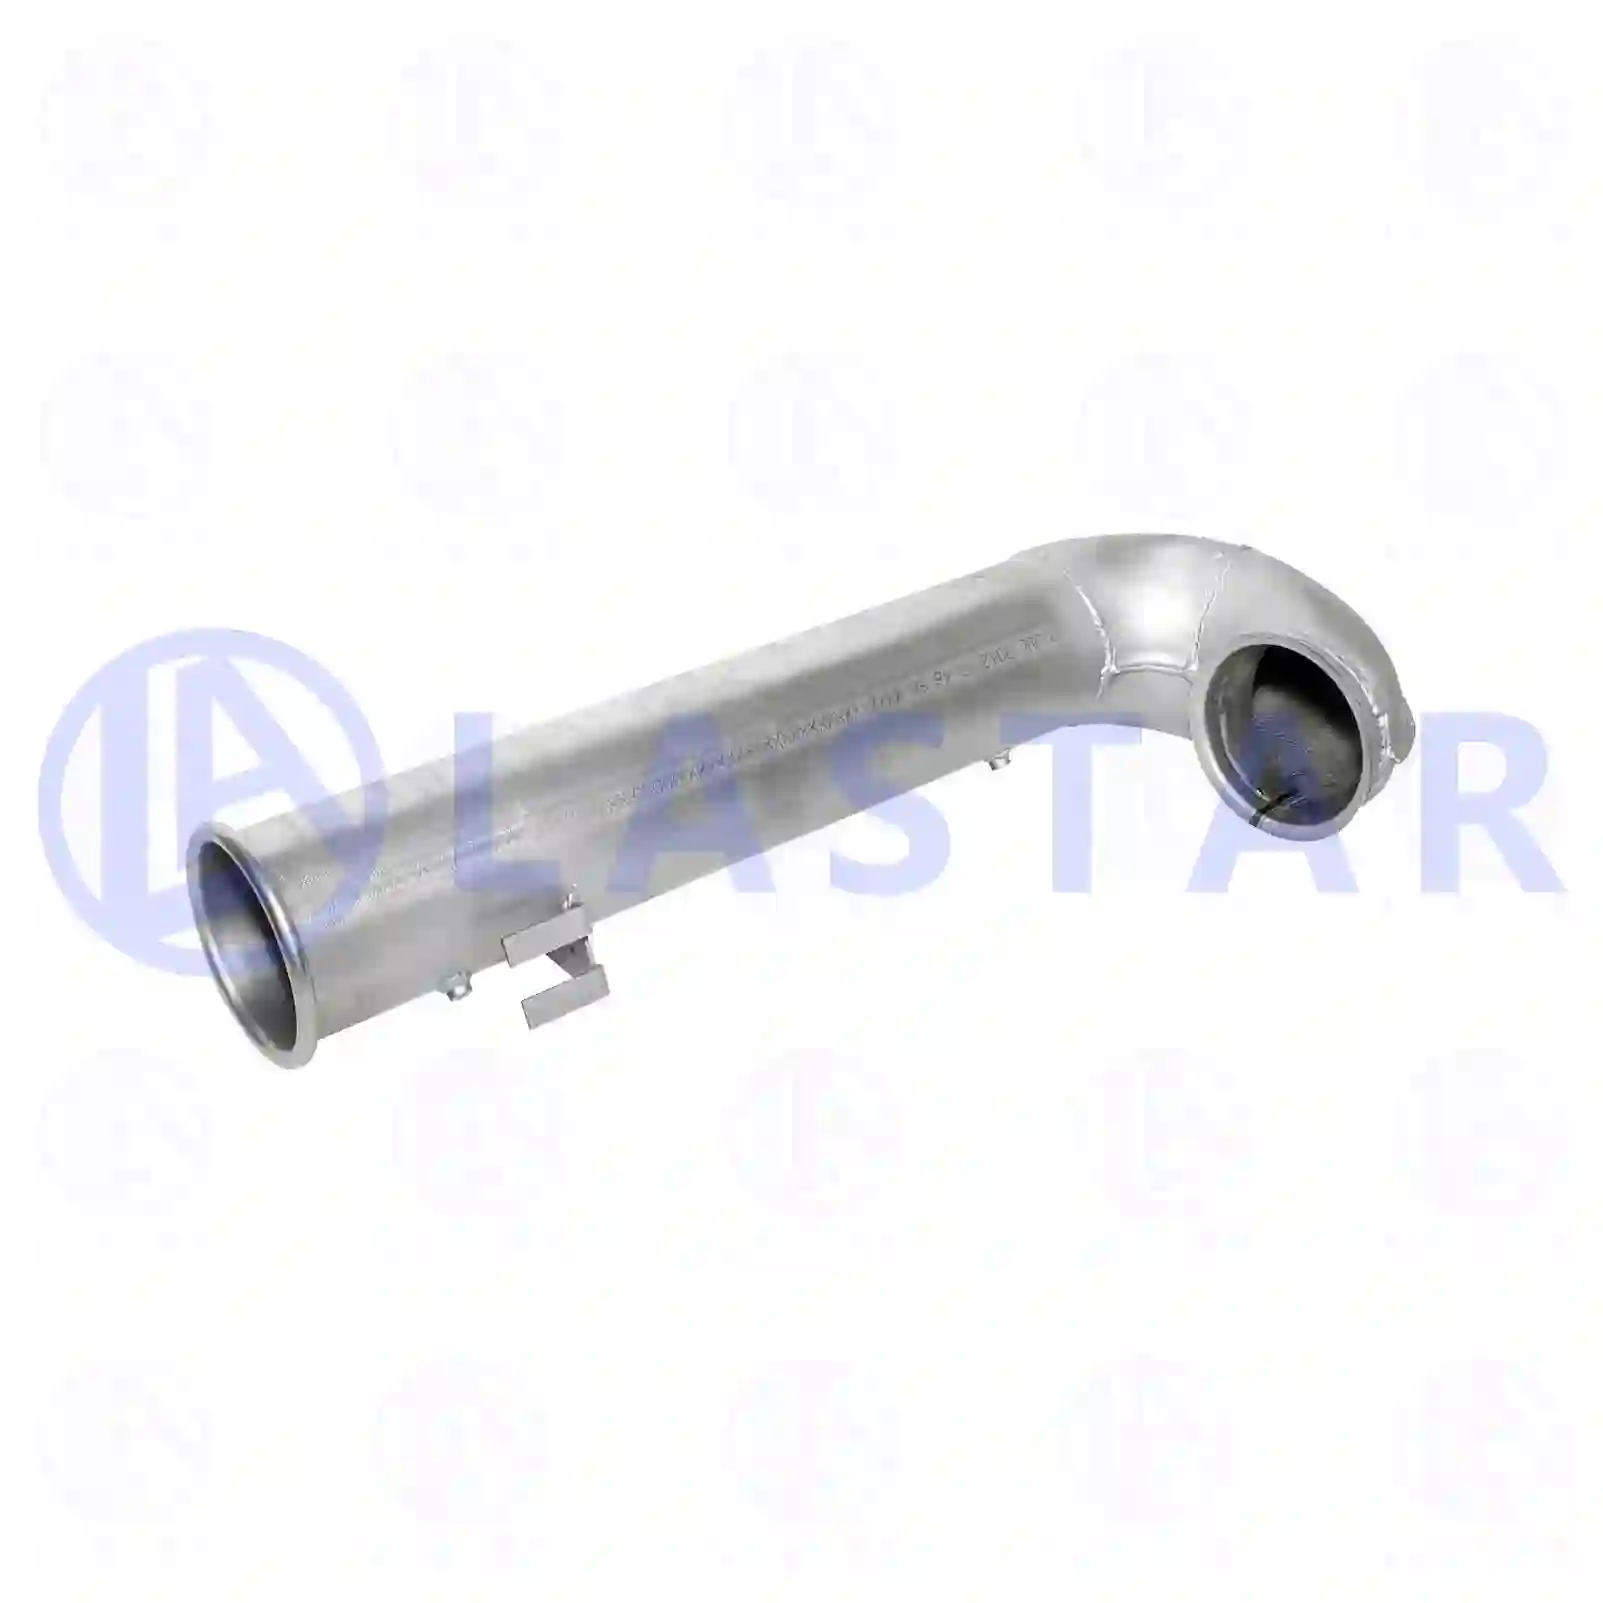 End pipe, 77706496, 1623466, 1745025 ||  77706496 Lastar Spare Part | Truck Spare Parts, Auotomotive Spare Parts End pipe, 77706496, 1623466, 1745025 ||  77706496 Lastar Spare Part | Truck Spare Parts, Auotomotive Spare Parts